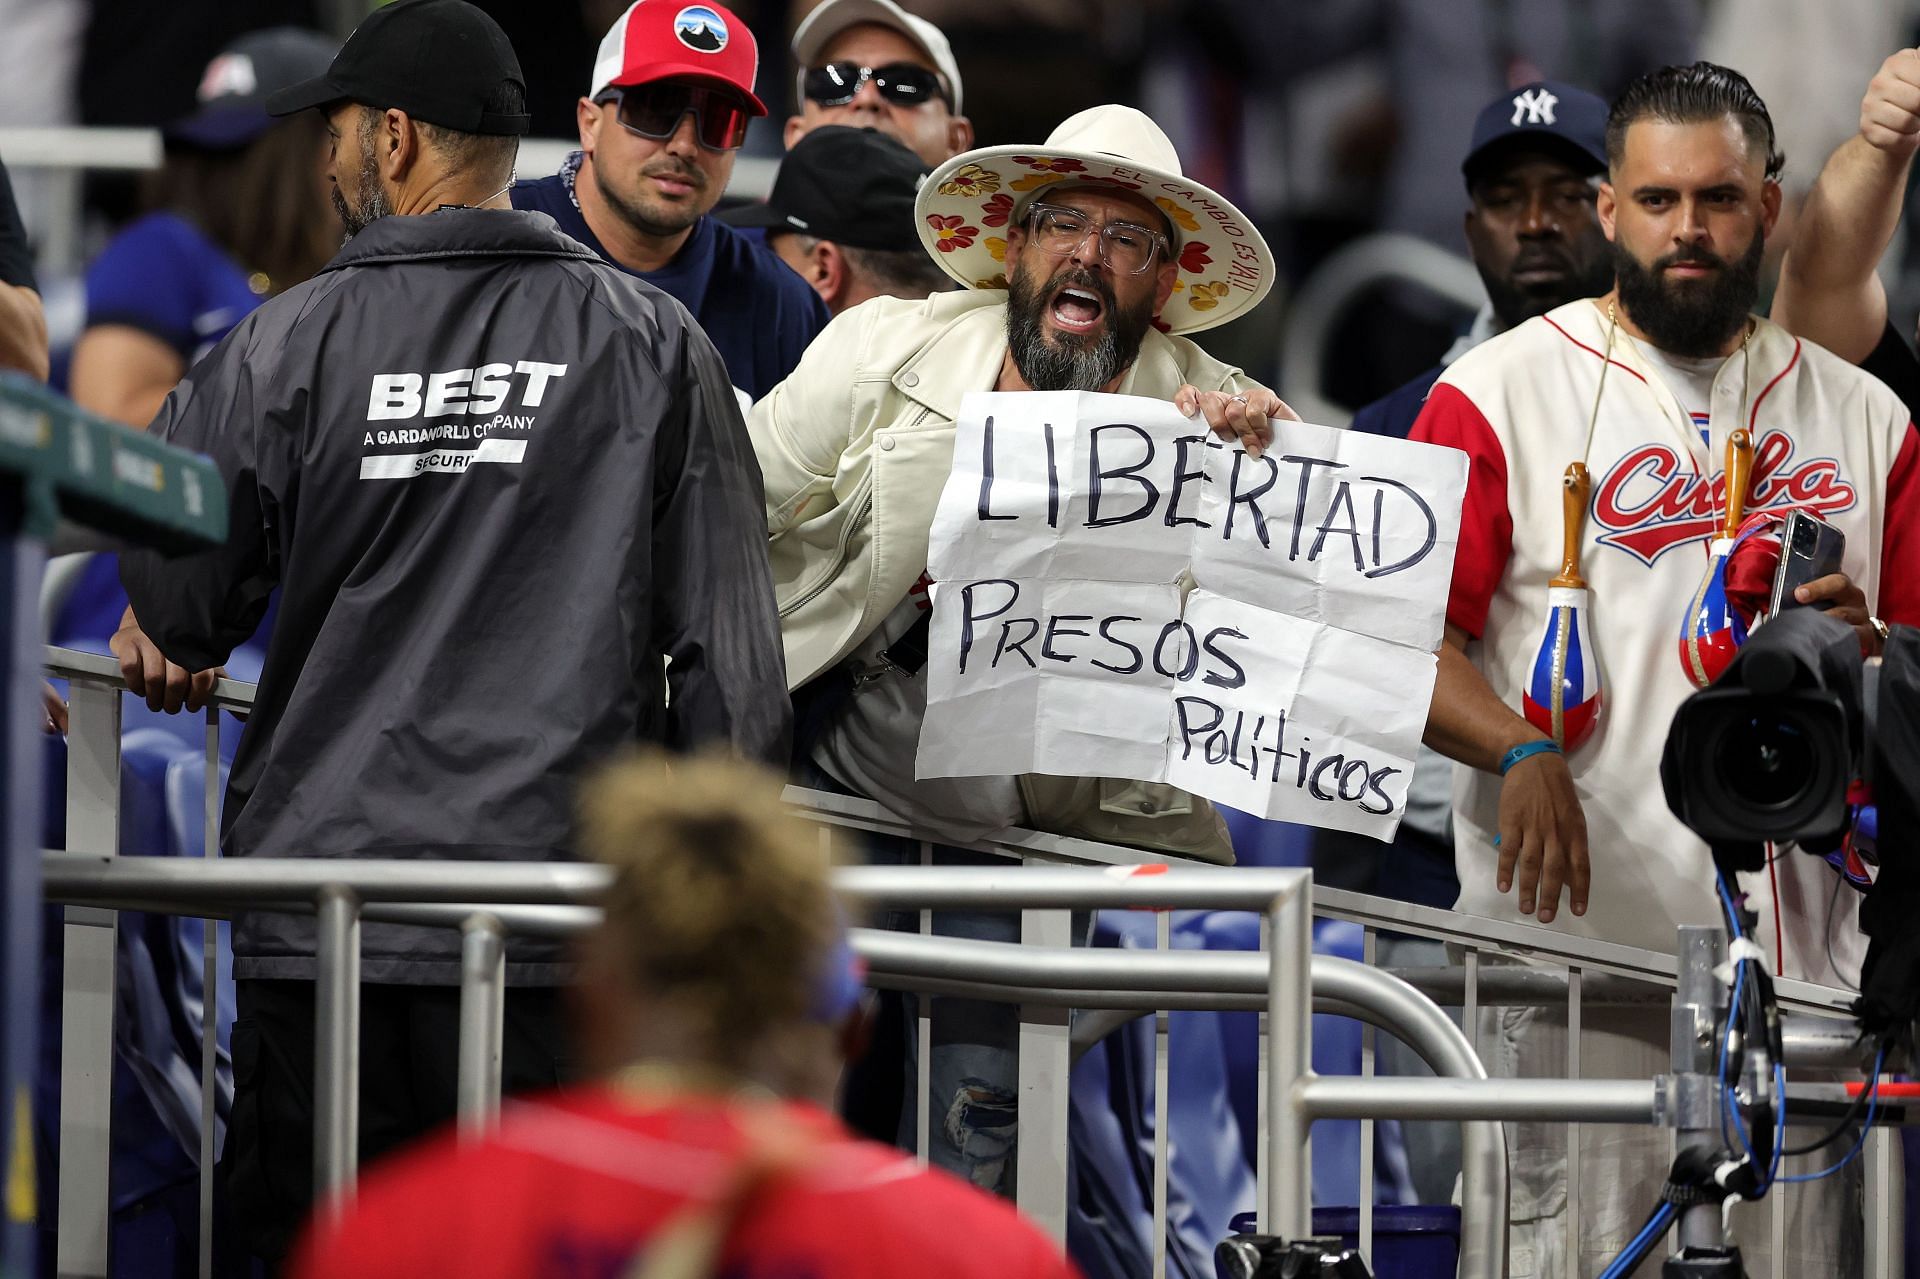 WBC's Cuba vs. USA semifinal in Miami is fraught with tension